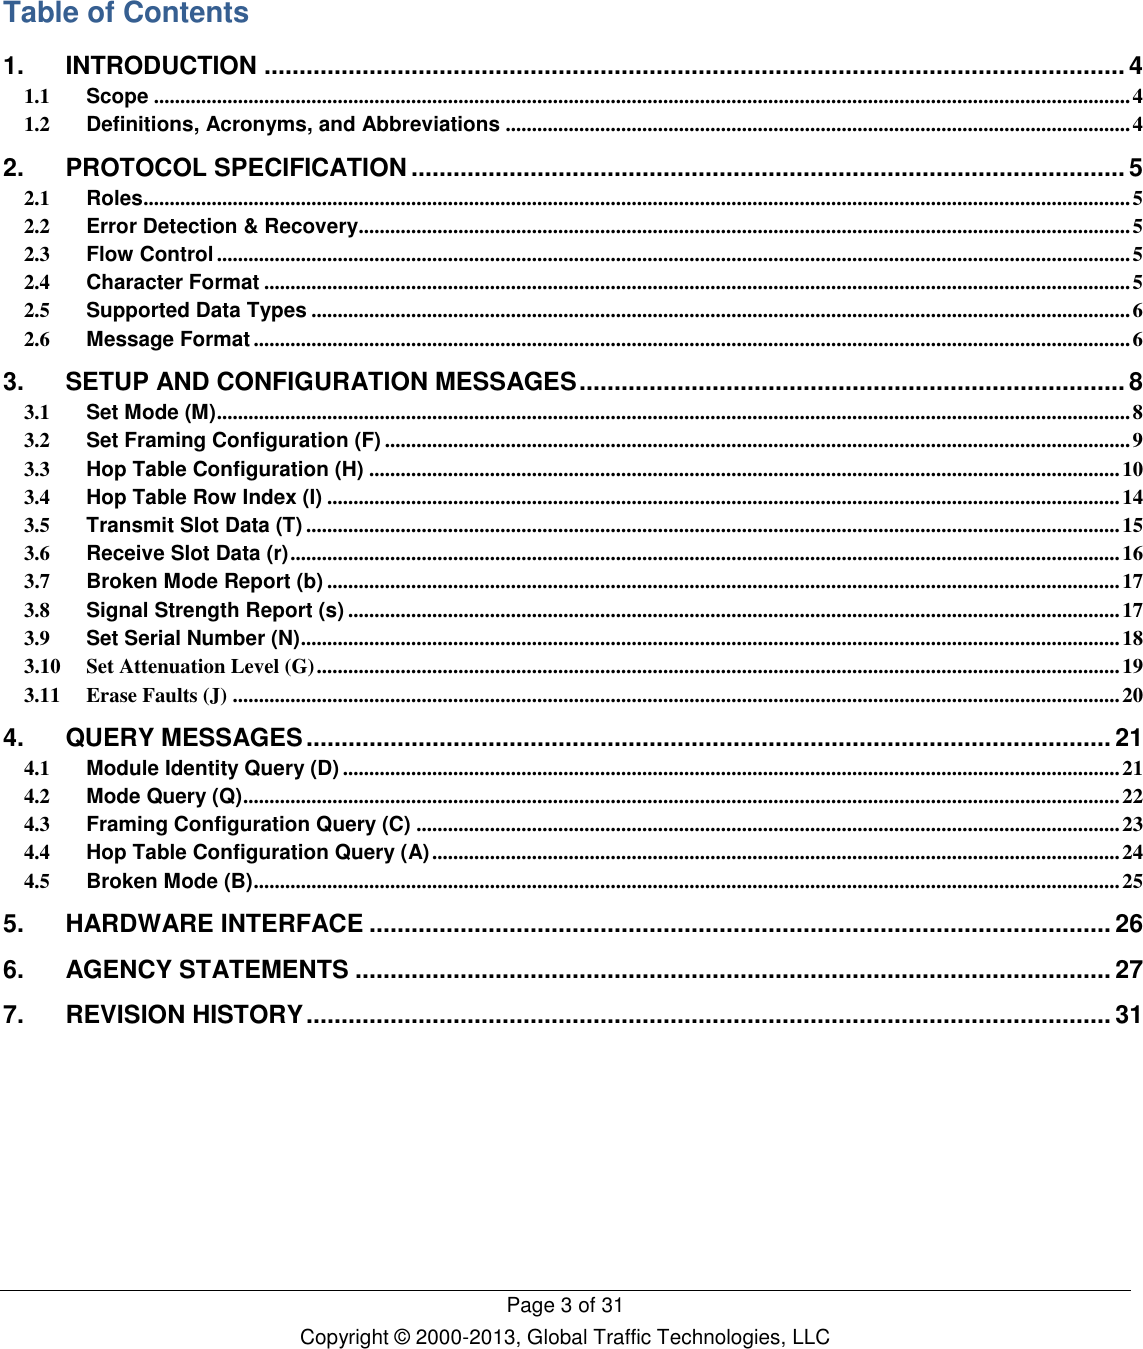   Page 3 of 31 Copyright © 2000-2013, Global Traffic Technologies, LLC   Table of Contents 1. INTRODUCTION ........................................................................................................................... 4 1.1 Scope .......................................................................................................................................................................................... 4 1.2 Definitions, Acronyms, and Abbreviations ....................................................................................................................... 4 2. PROTOCOL SPECIFICATION ...................................................................................................... 5 2.1 Roles ............................................................................................................................................................................................ 5 2.2 Error Detection &amp; Recovery................................................................................................................................................... 5 2.3 Flow Control .............................................................................................................................................................................. 5 2.4 Character Format ..................................................................................................................................................................... 5 2.5 Supported Data Types ............................................................................................................................................................ 6 2.6 Message Format ....................................................................................................................................................................... 6 3. SETUP AND CONFIGURATION MESSAGES .............................................................................. 8 3.1 Set Mode (M) .............................................................................................................................................................................. 8 3.2 Set Framing Configuration (F) .............................................................................................................................................. 9 3.3 Hop Table Configuration (H) ............................................................................................................................................... 10 3.4 Hop Table Row Index (I) ....................................................................................................................................................... 14 3.5 Transmit Slot Data (T) ........................................................................................................................................................... 15 3.6 Receive Slot Data (r) .............................................................................................................................................................. 16 3.7 Broken Mode Report (b) ....................................................................................................................................................... 17 3.8 Signal Strength Report (s) ................................................................................................................................................... 17 3.9 Set Serial Number (N) ............................................................................................................................................................ 18 3.10 Set Attenuation Level (G) ......................................................................................................................................................... 19 3.11 Erase Faults (J) ......................................................................................................................................................................... 20 4. QUERY MESSAGES ................................................................................................................... 21 4.1 Module Identity Query (D) .................................................................................................................................................... 21 4.2 Mode Query (Q) ....................................................................................................................................................................... 22 4.3 Framing Configuration Query (C) ...................................................................................................................................... 23 4.4 Hop Table Configuration Query (A) ................................................................................................................................... 24 4.5 Broken Mode (B) ..................................................................................................................................................................... 25 5. HARDWARE INTERFACE .......................................................................................................... 26 6. AGENCY STATEMENTS ............................................................................................................ 27 7. REVISION HISTORY ................................................................................................................... 31           